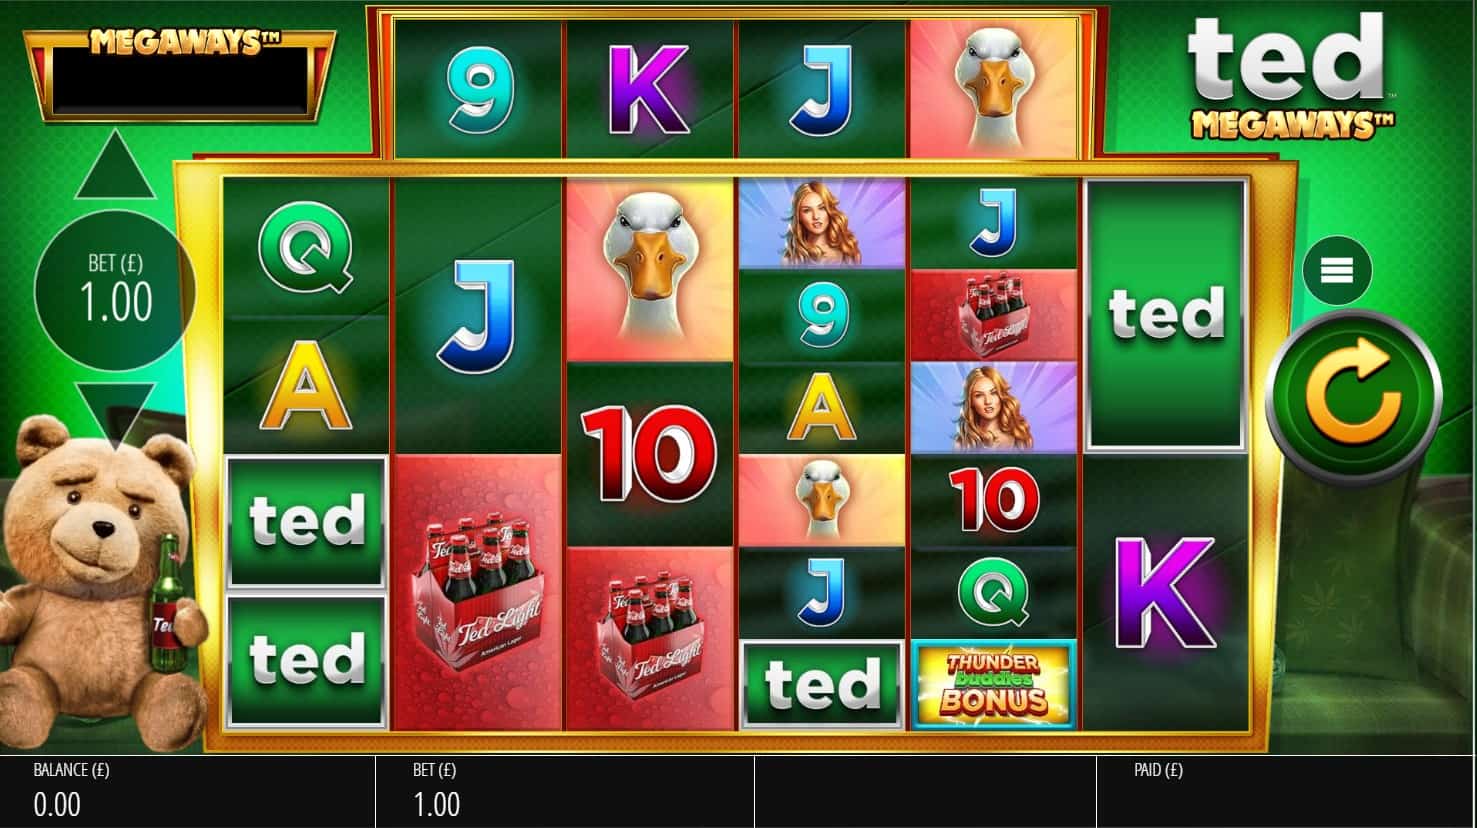 Ted Megaways Movie Slot Review Play at Megaways Casino Review at E-Vegas.com#